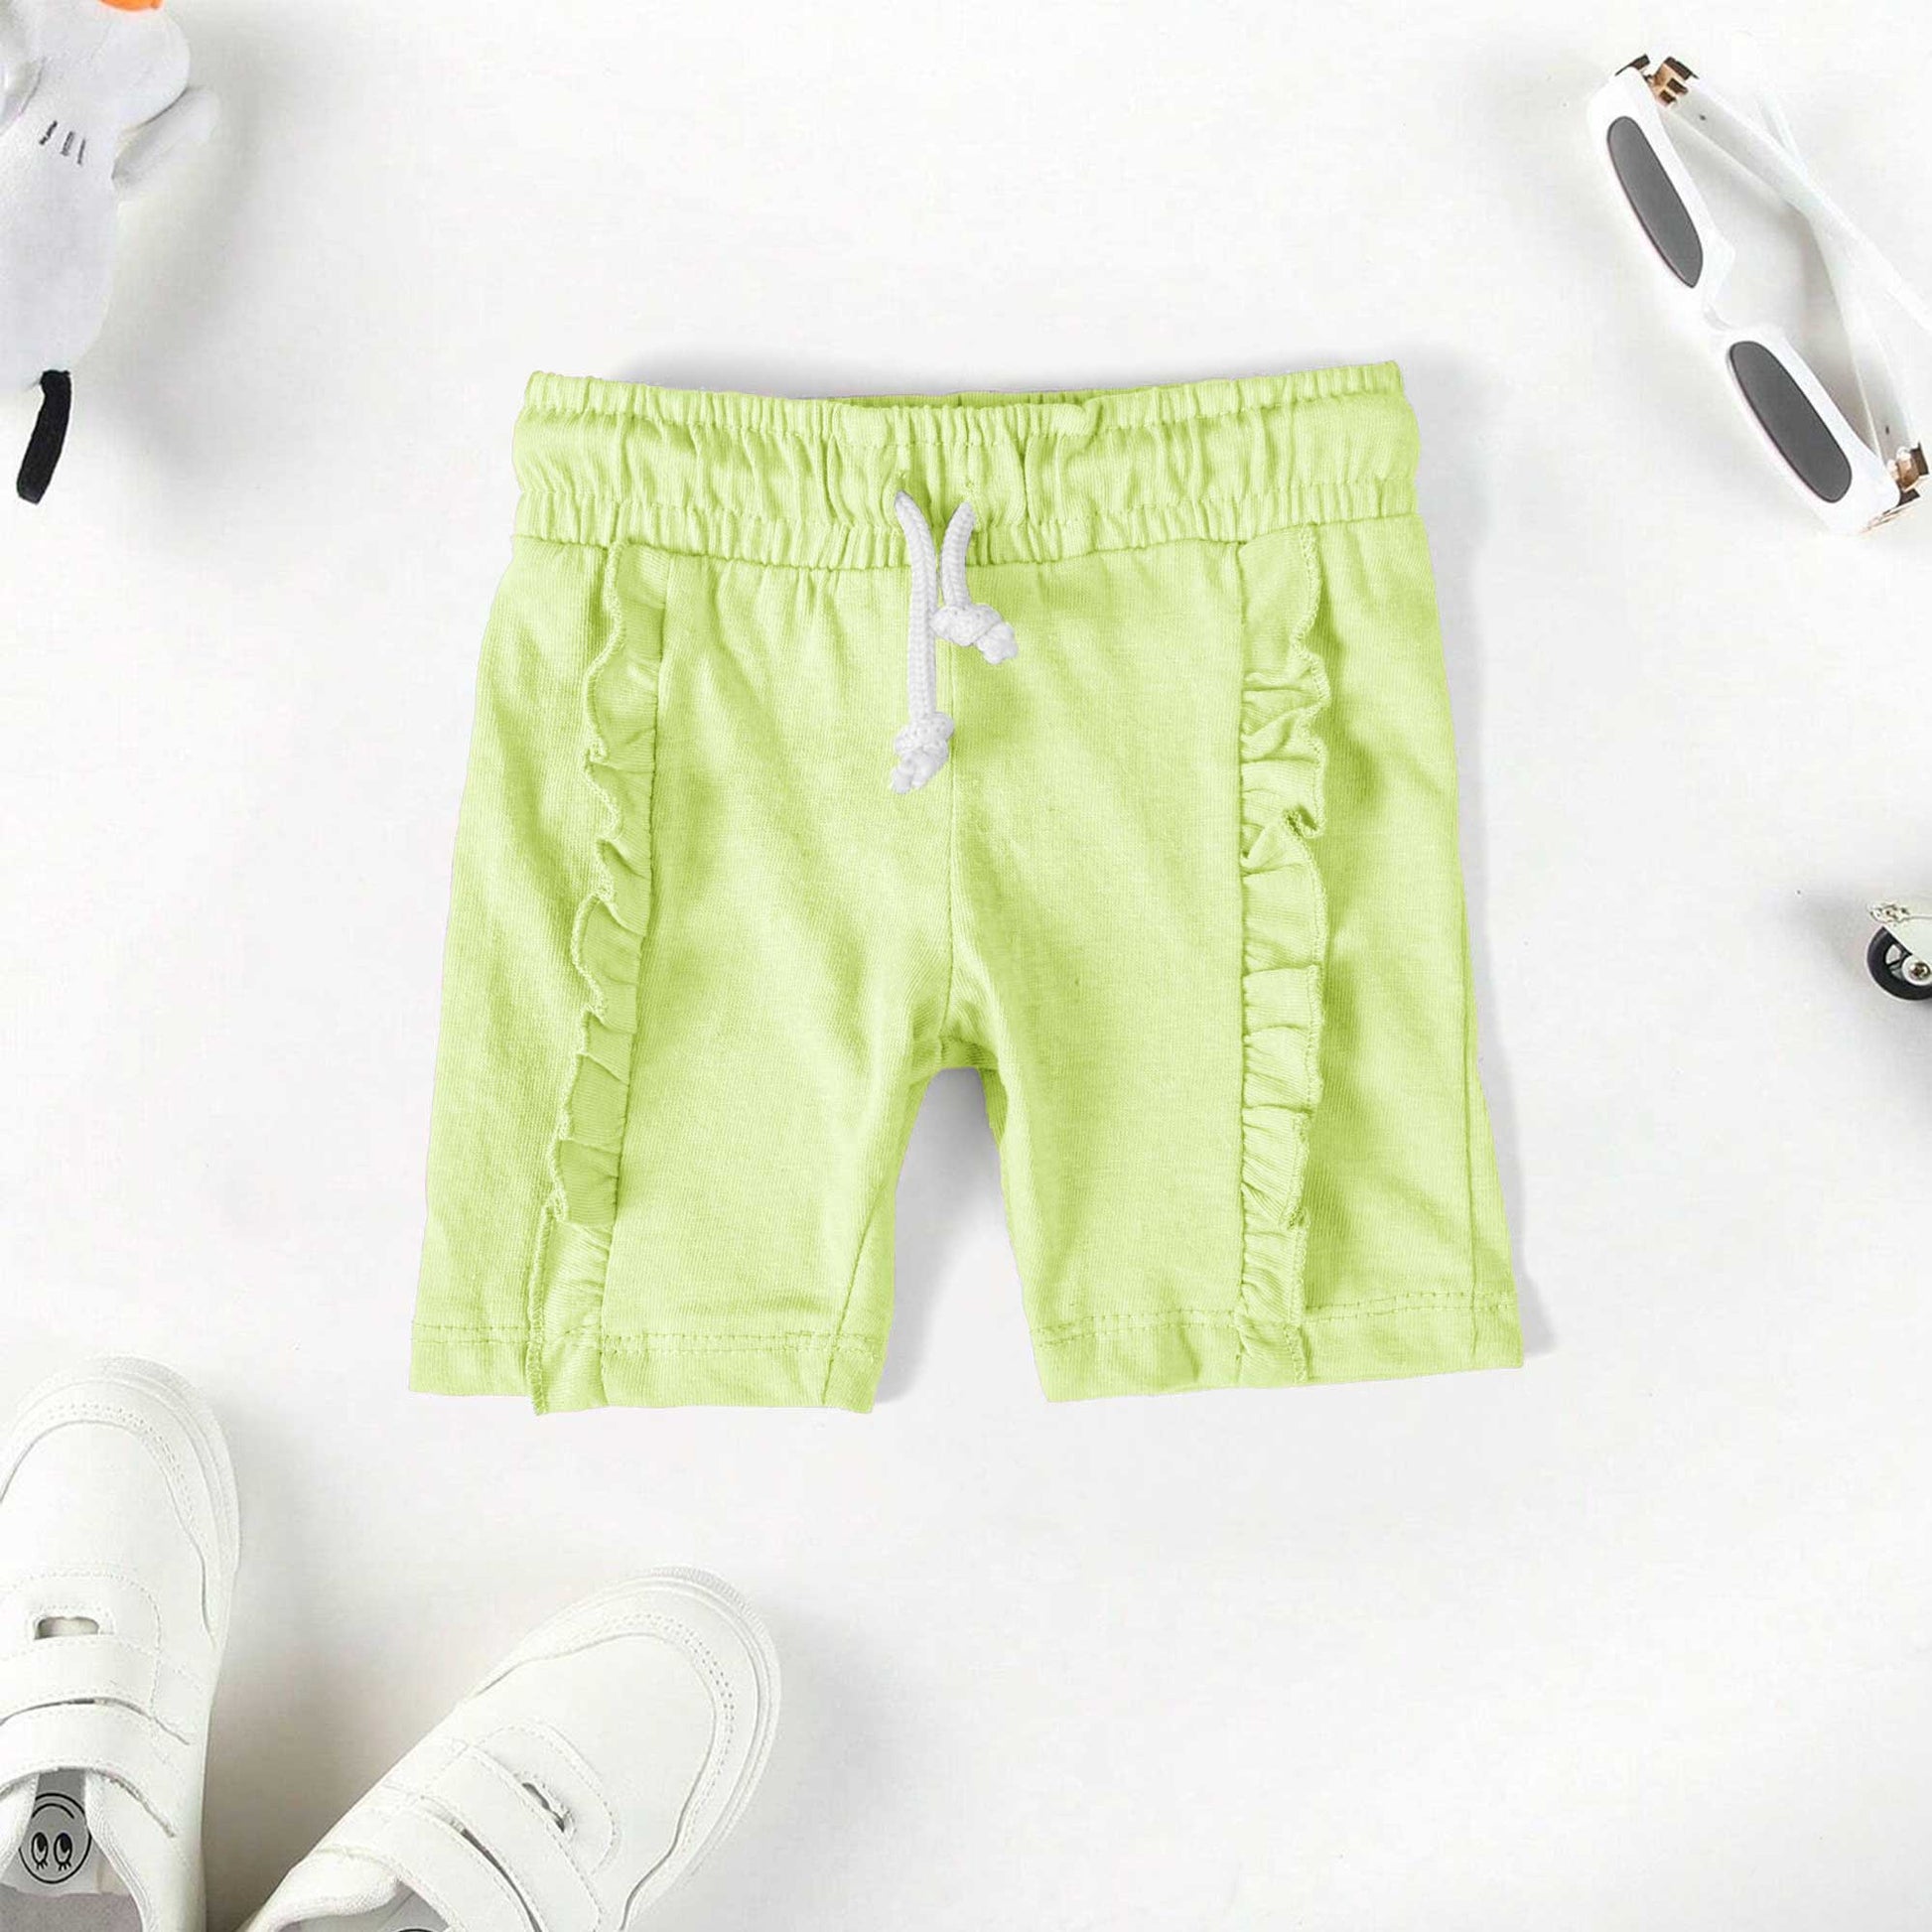 ZR Kid's Comfy Shorts Kid's Shorts SNR Parrot 6-9 Months 